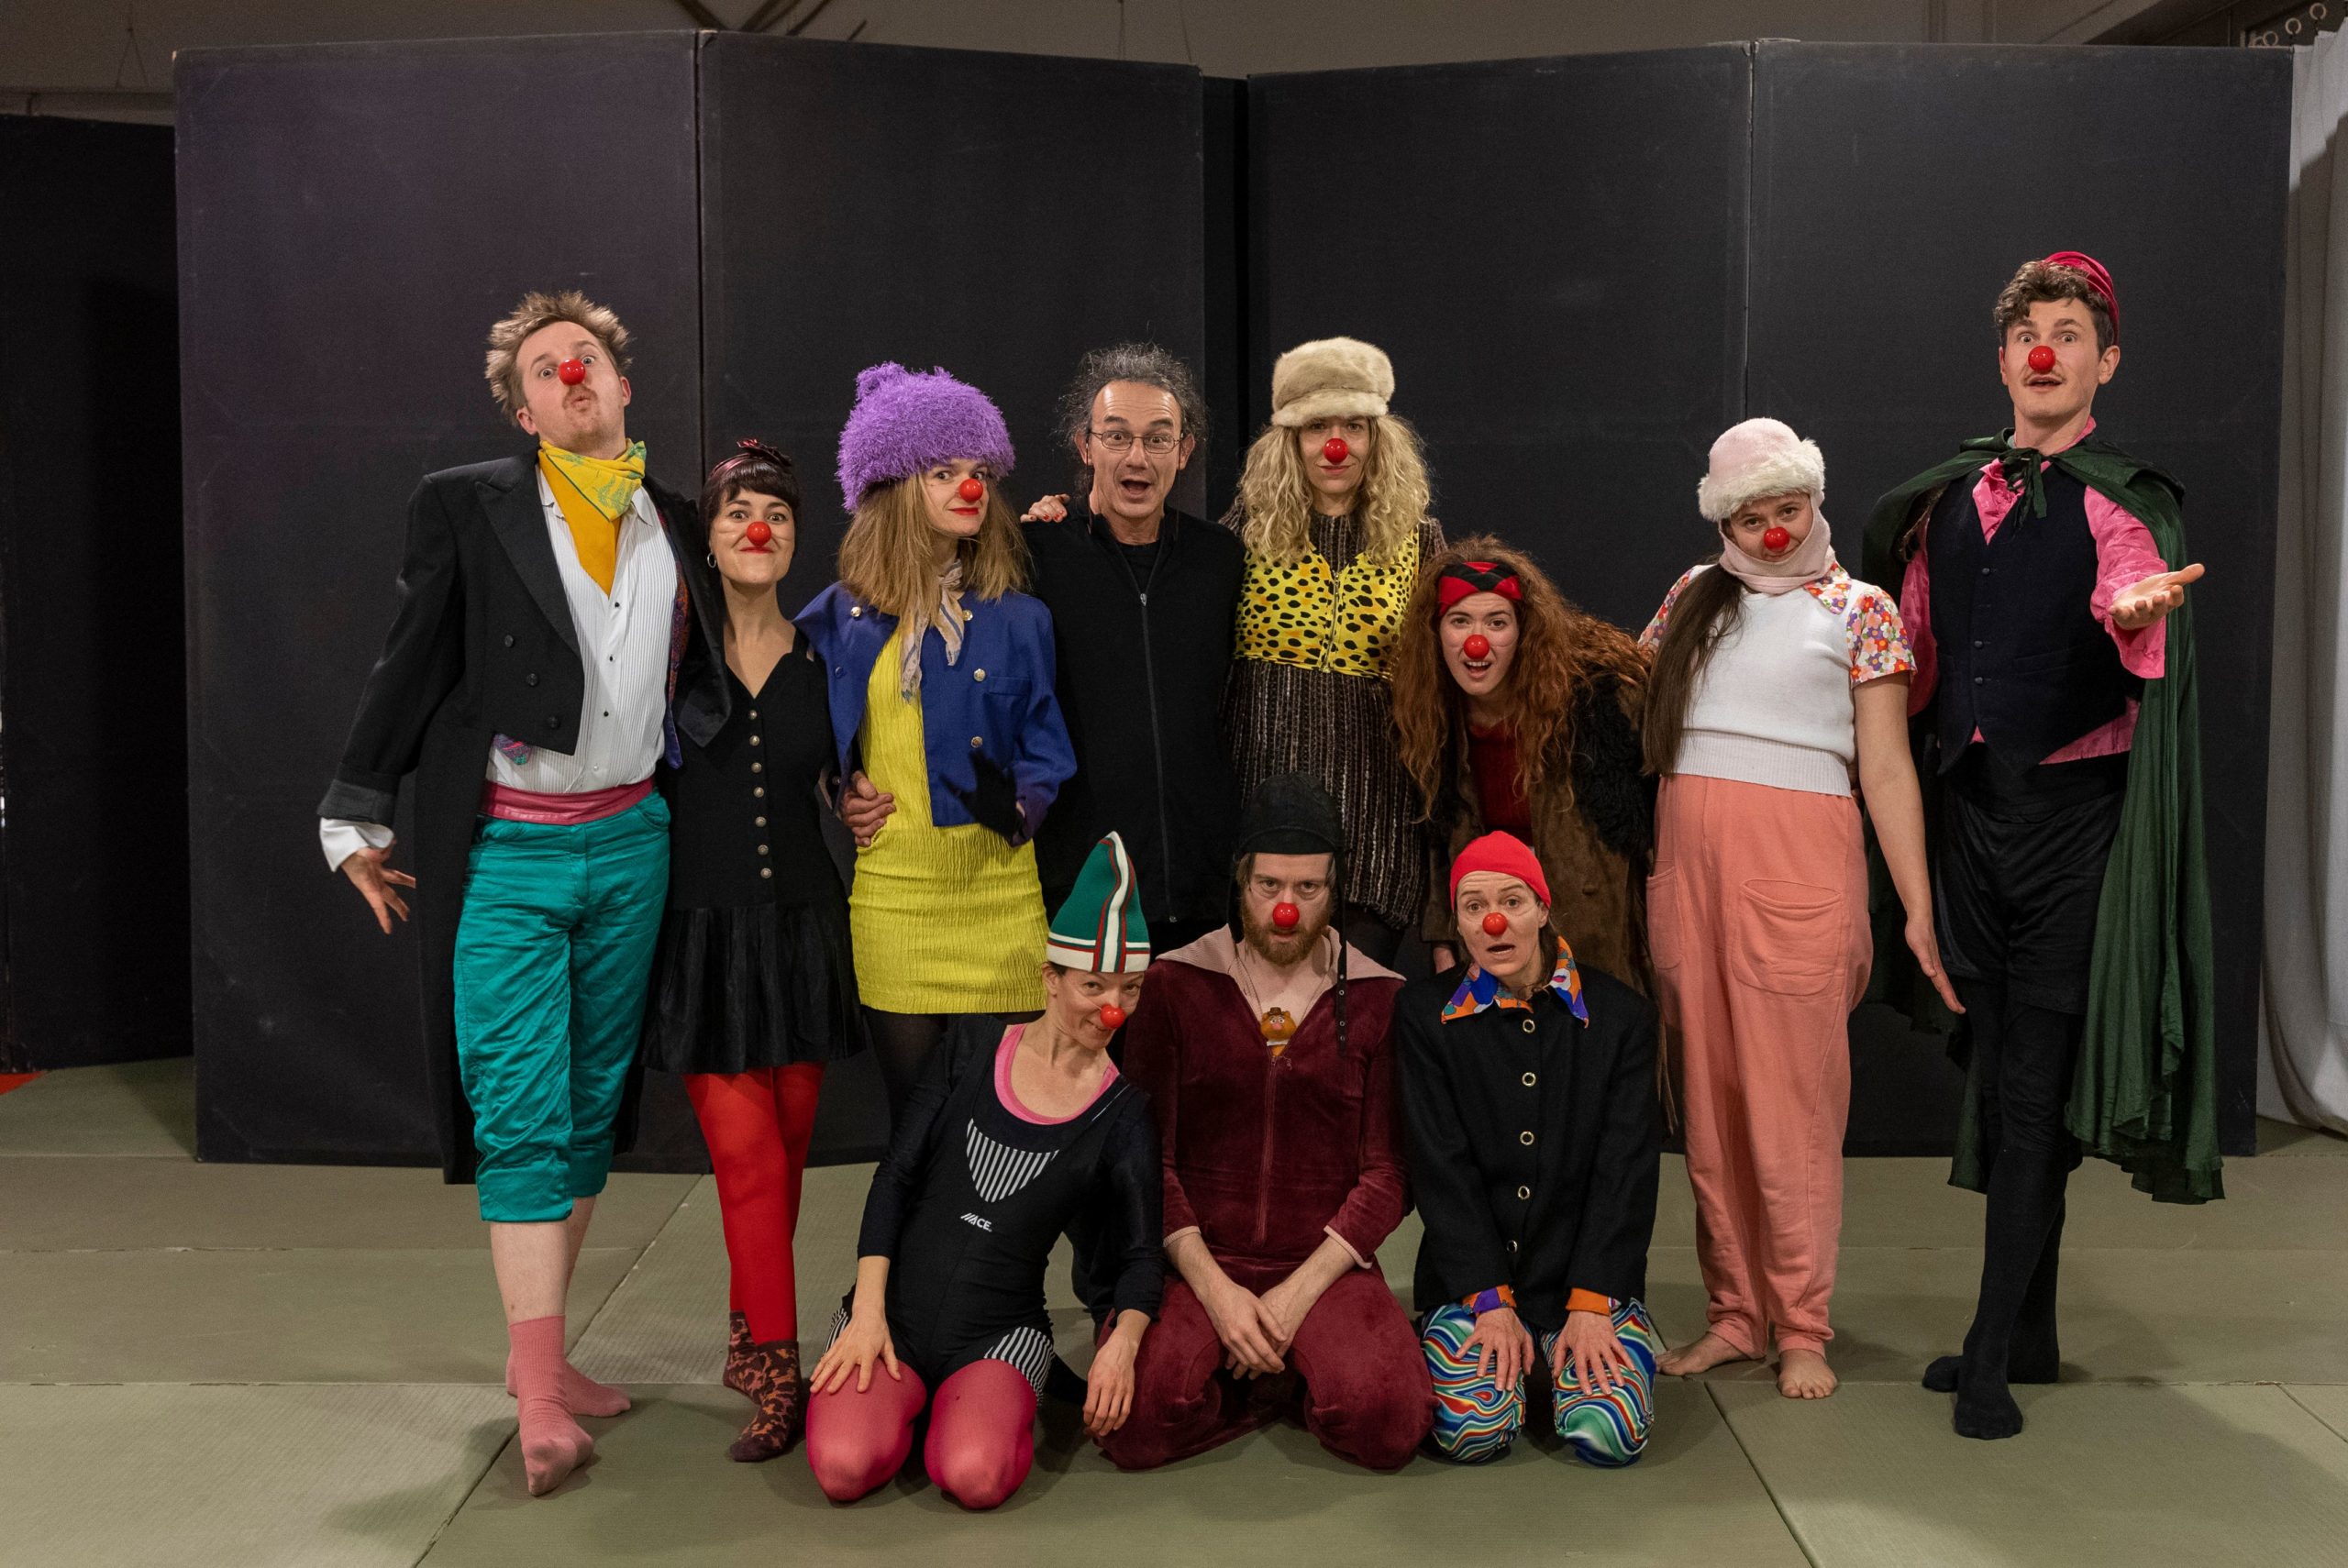 Mixed group of actors onstage wearing clown outfits and red noses